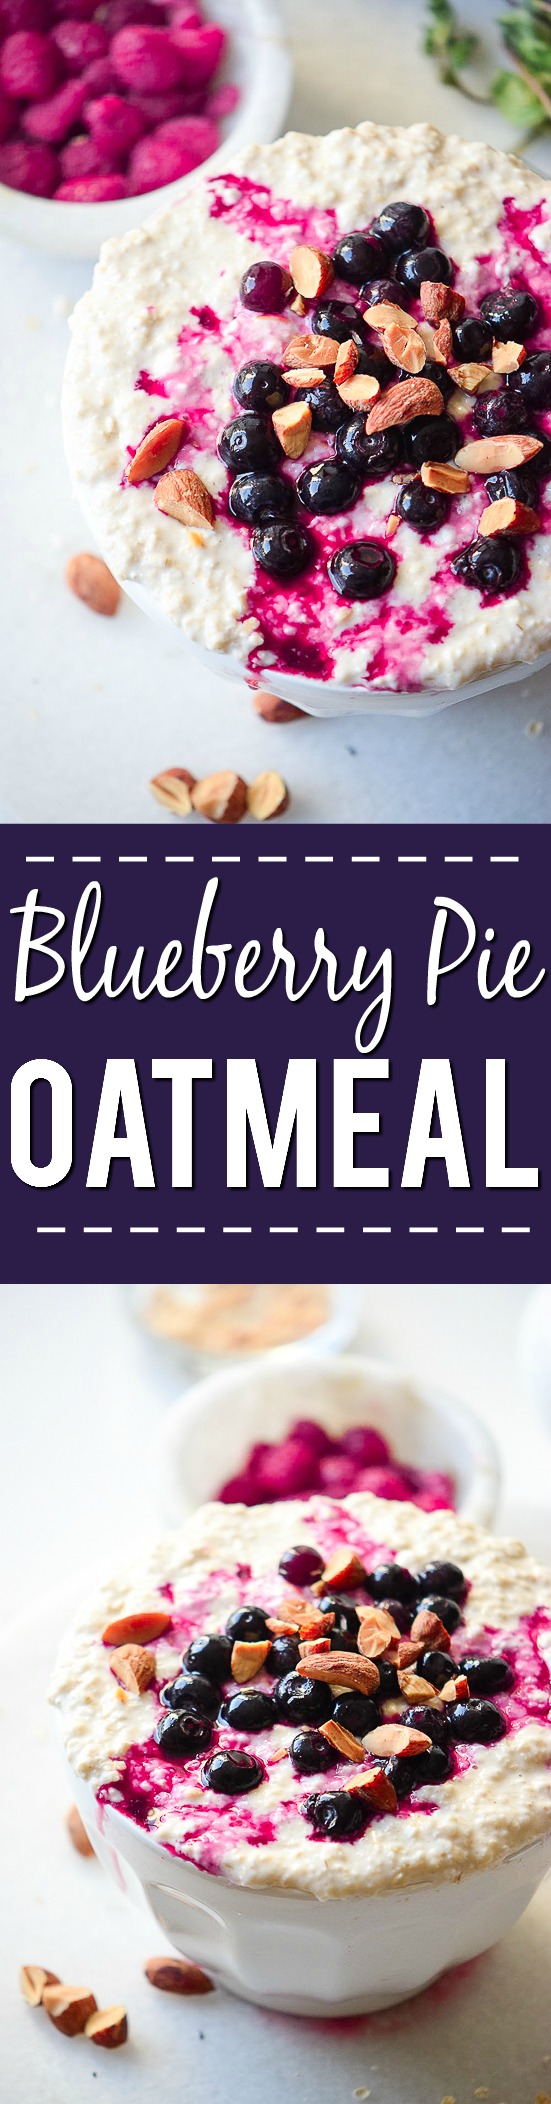 Blueberry Pie Oatmeal Recipe - For a quick and easy breakfast, try this Blueberry Pie Oatmeal recipe that's packed with fresh (or frozen!) blueberries, with a little bit of cinnamon and brown sugar for a healthy breakfast in 10 minutes!